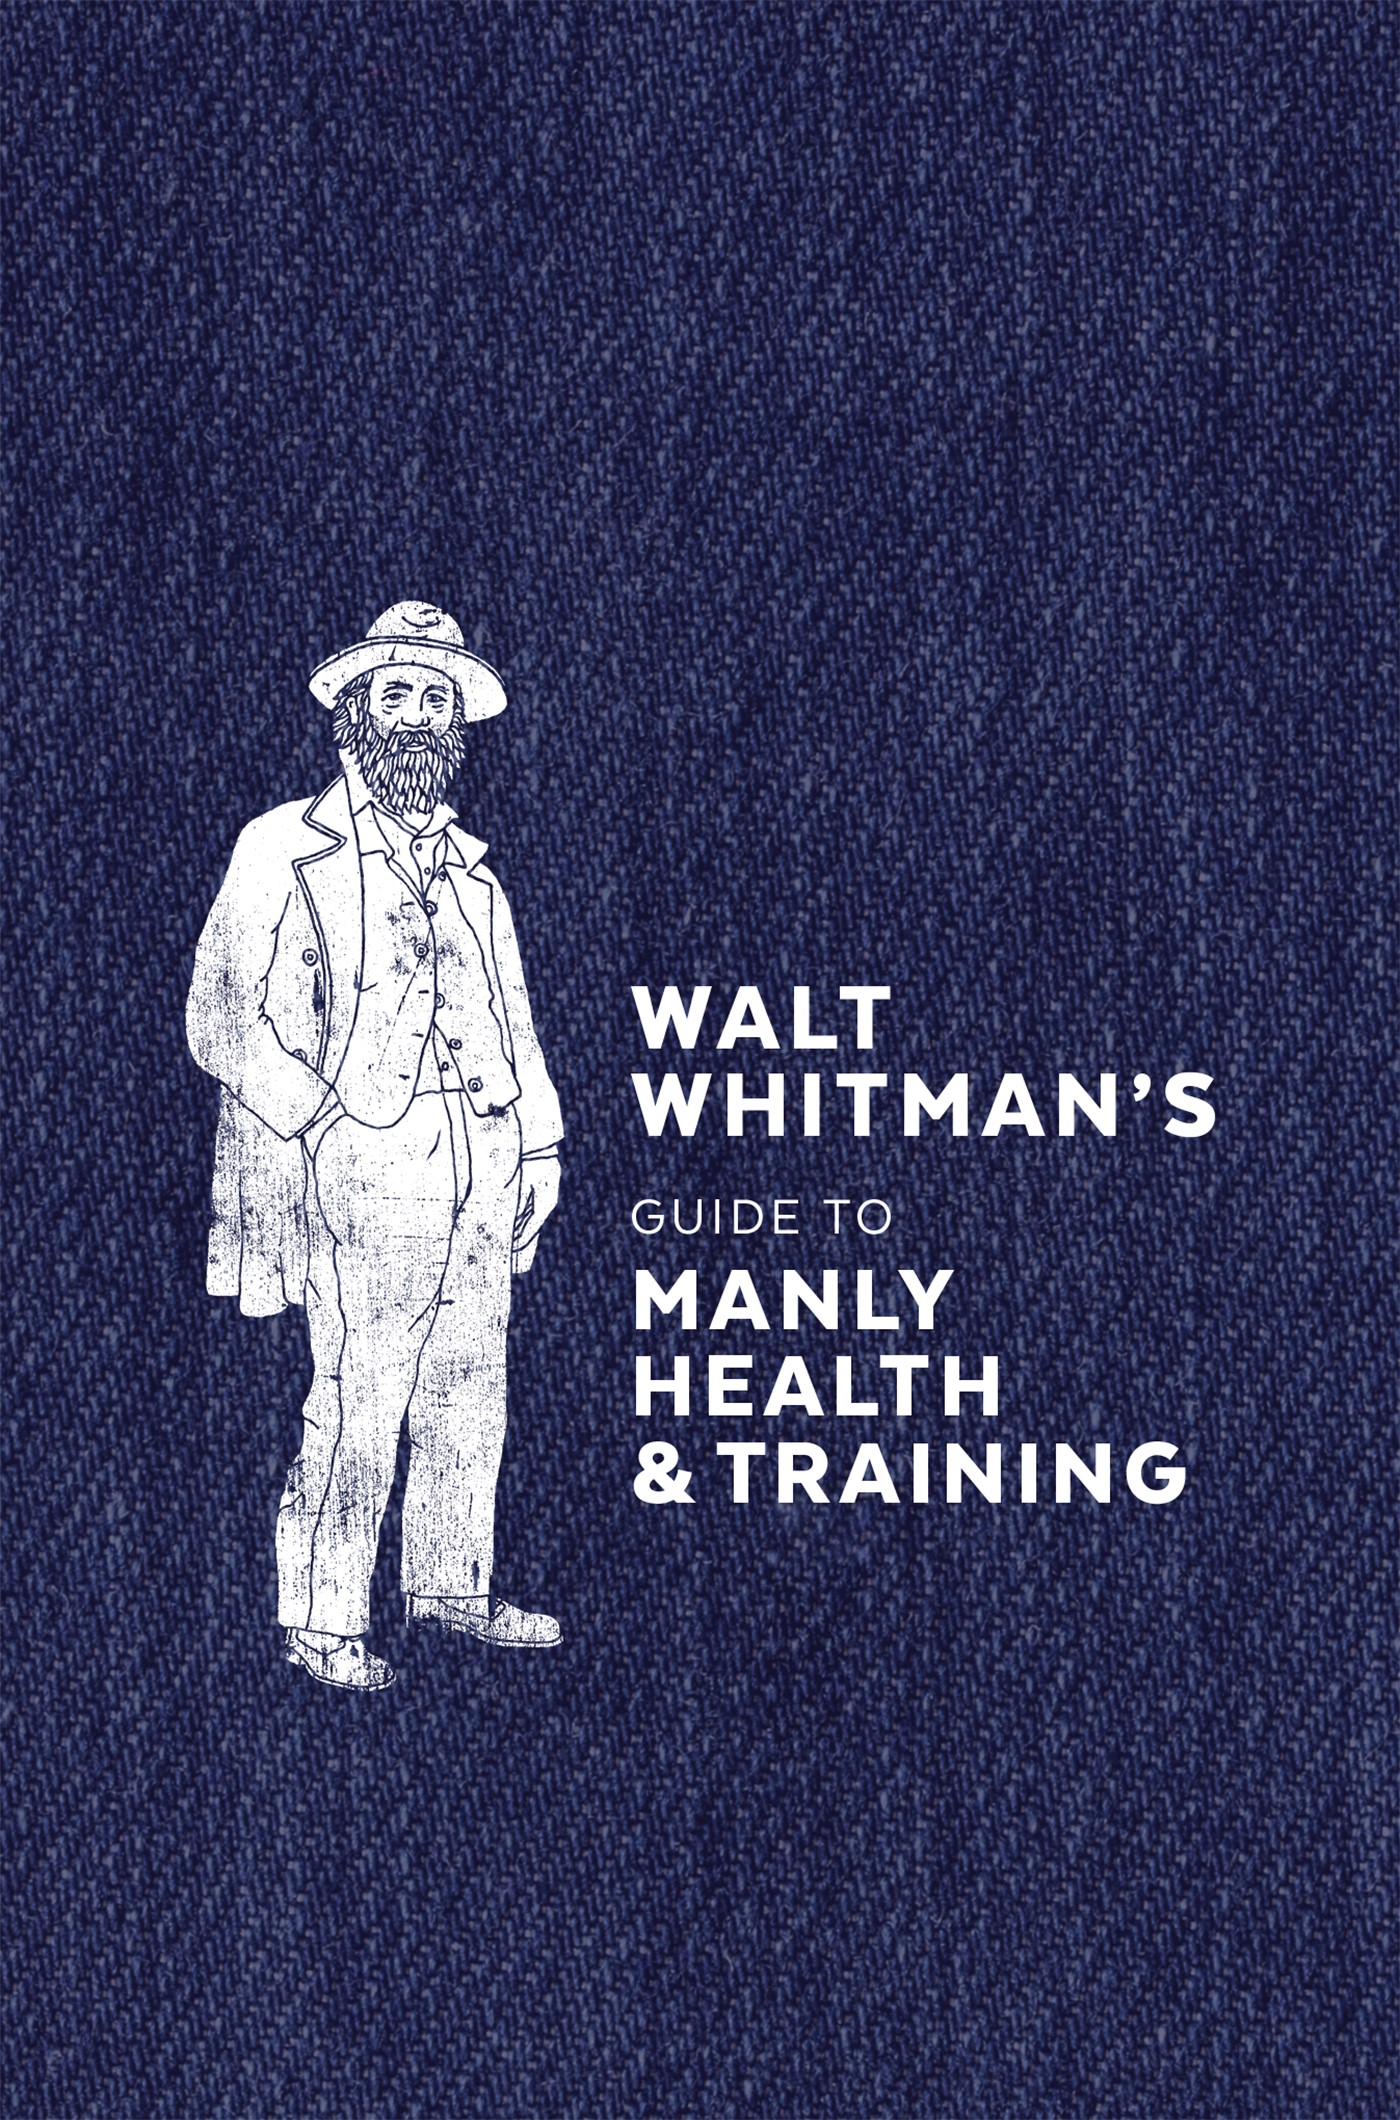 Walt Whitman’s Guide to Manly Health & Training